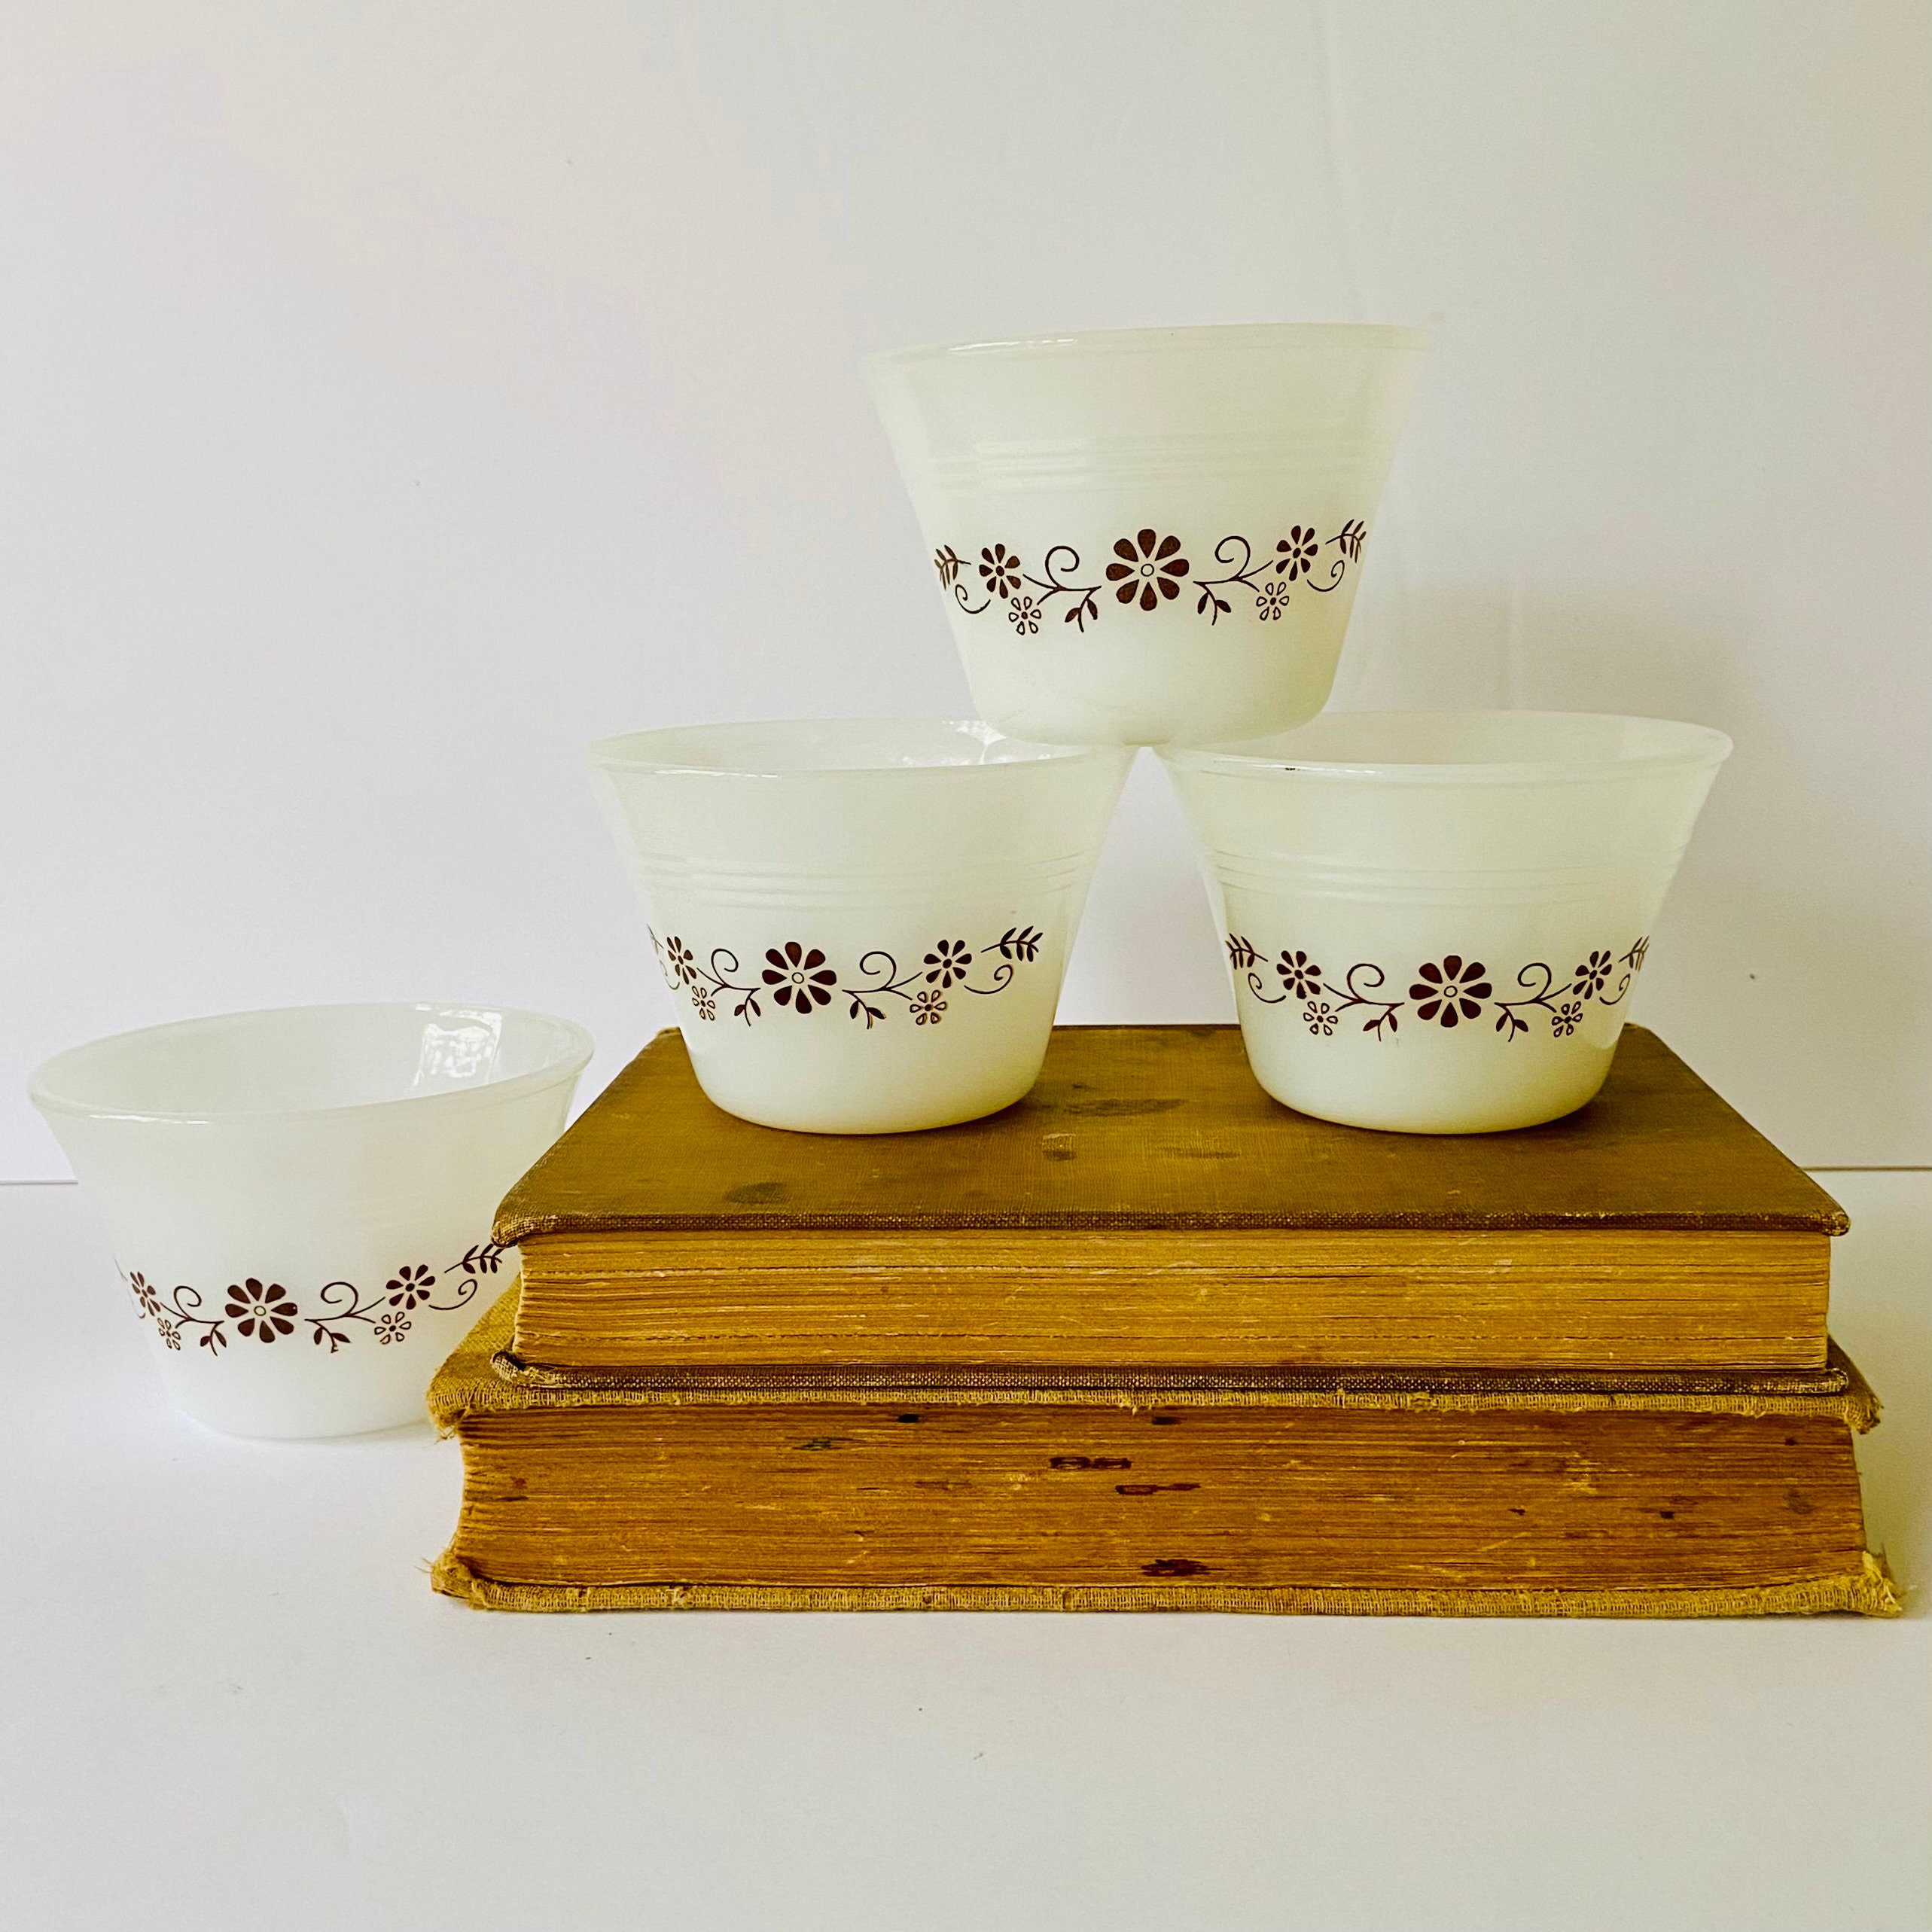 Yedio 6 oz Porcelain Square Bowl, Square Ramekins for Pudding and Snacks,  Porcelain Dip Bowls, Small Serving Bowls for Dip Sauce and Baking, Oven